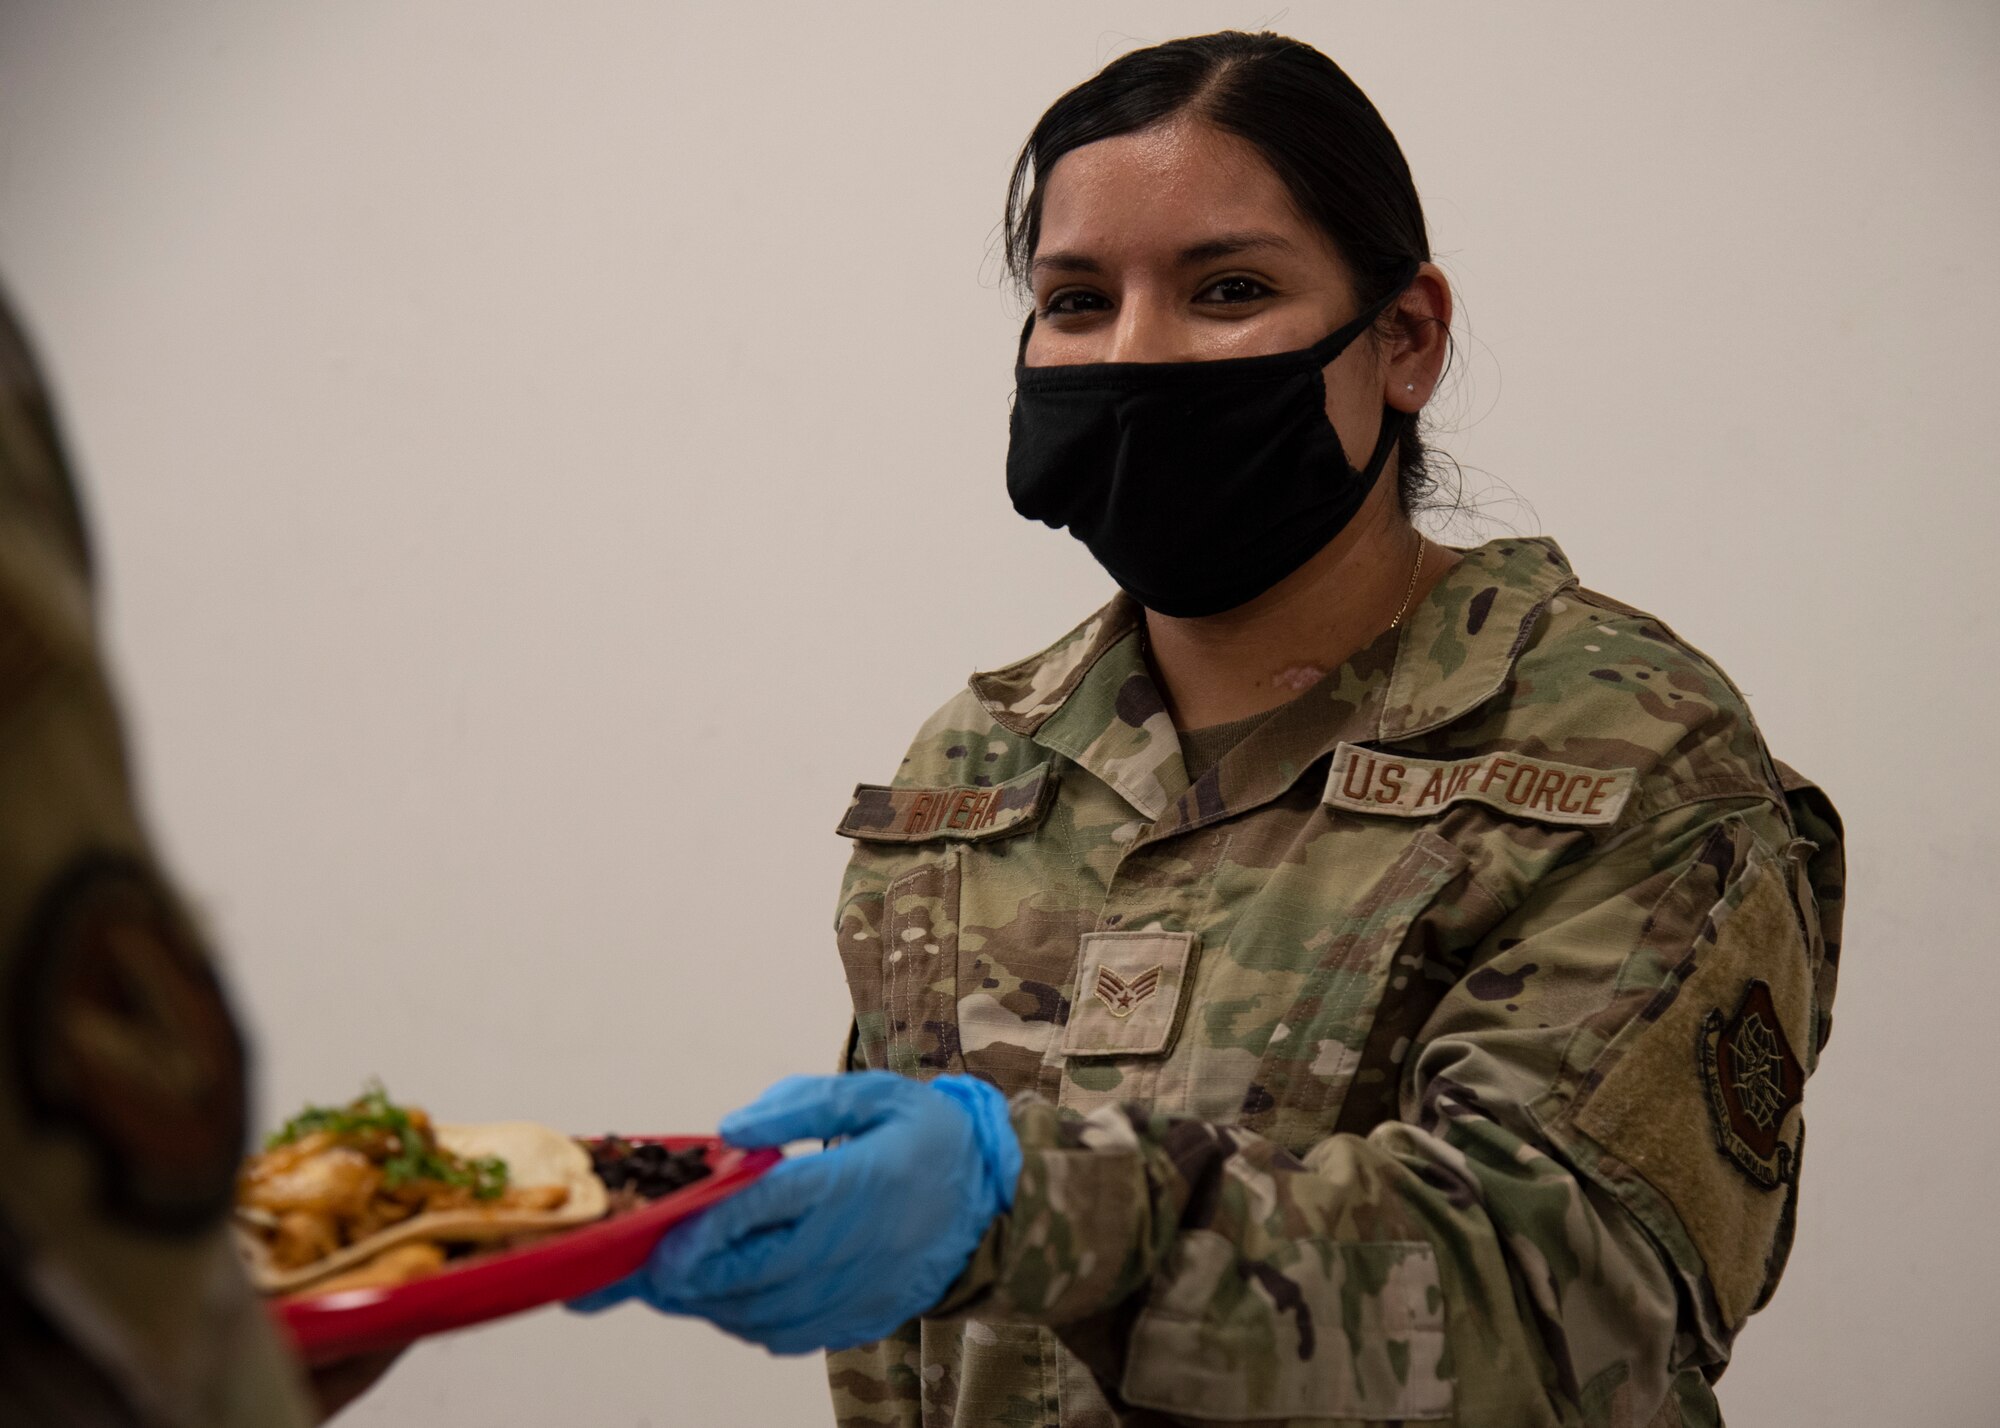 U.S. Air Force Senior Airman Martha Rivera, 6th Force Support Squadron Food Services journeyman, serves refreshments during a Hispanic Heritage Month celebration at MacDill Air Force Base, Florida, Oct. 14, 2021.